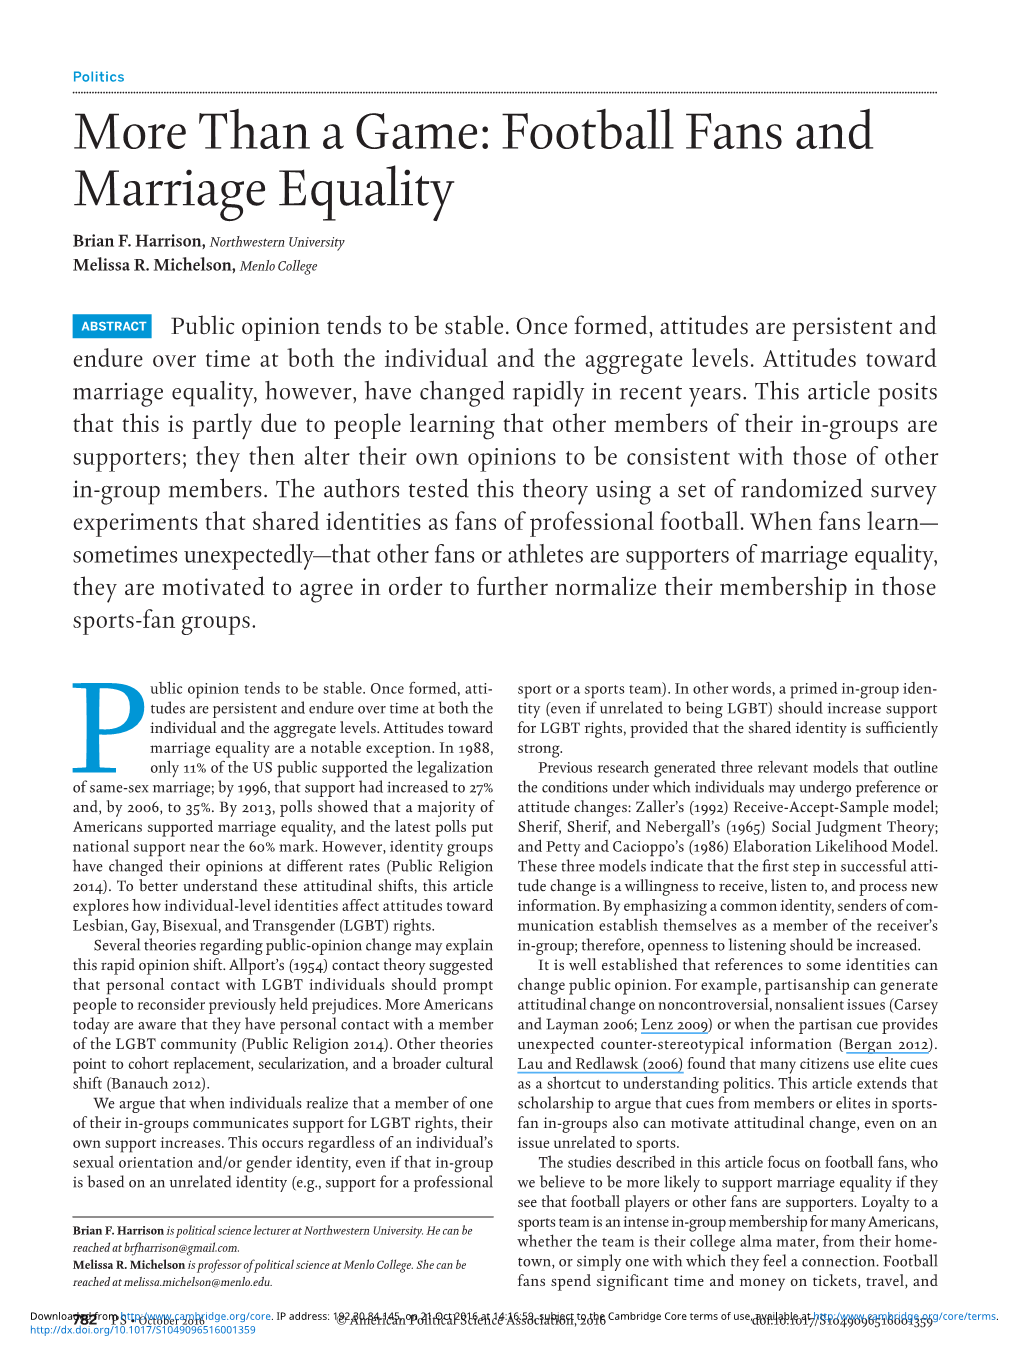 More Than a Game: Football Fans and Marriage Equality